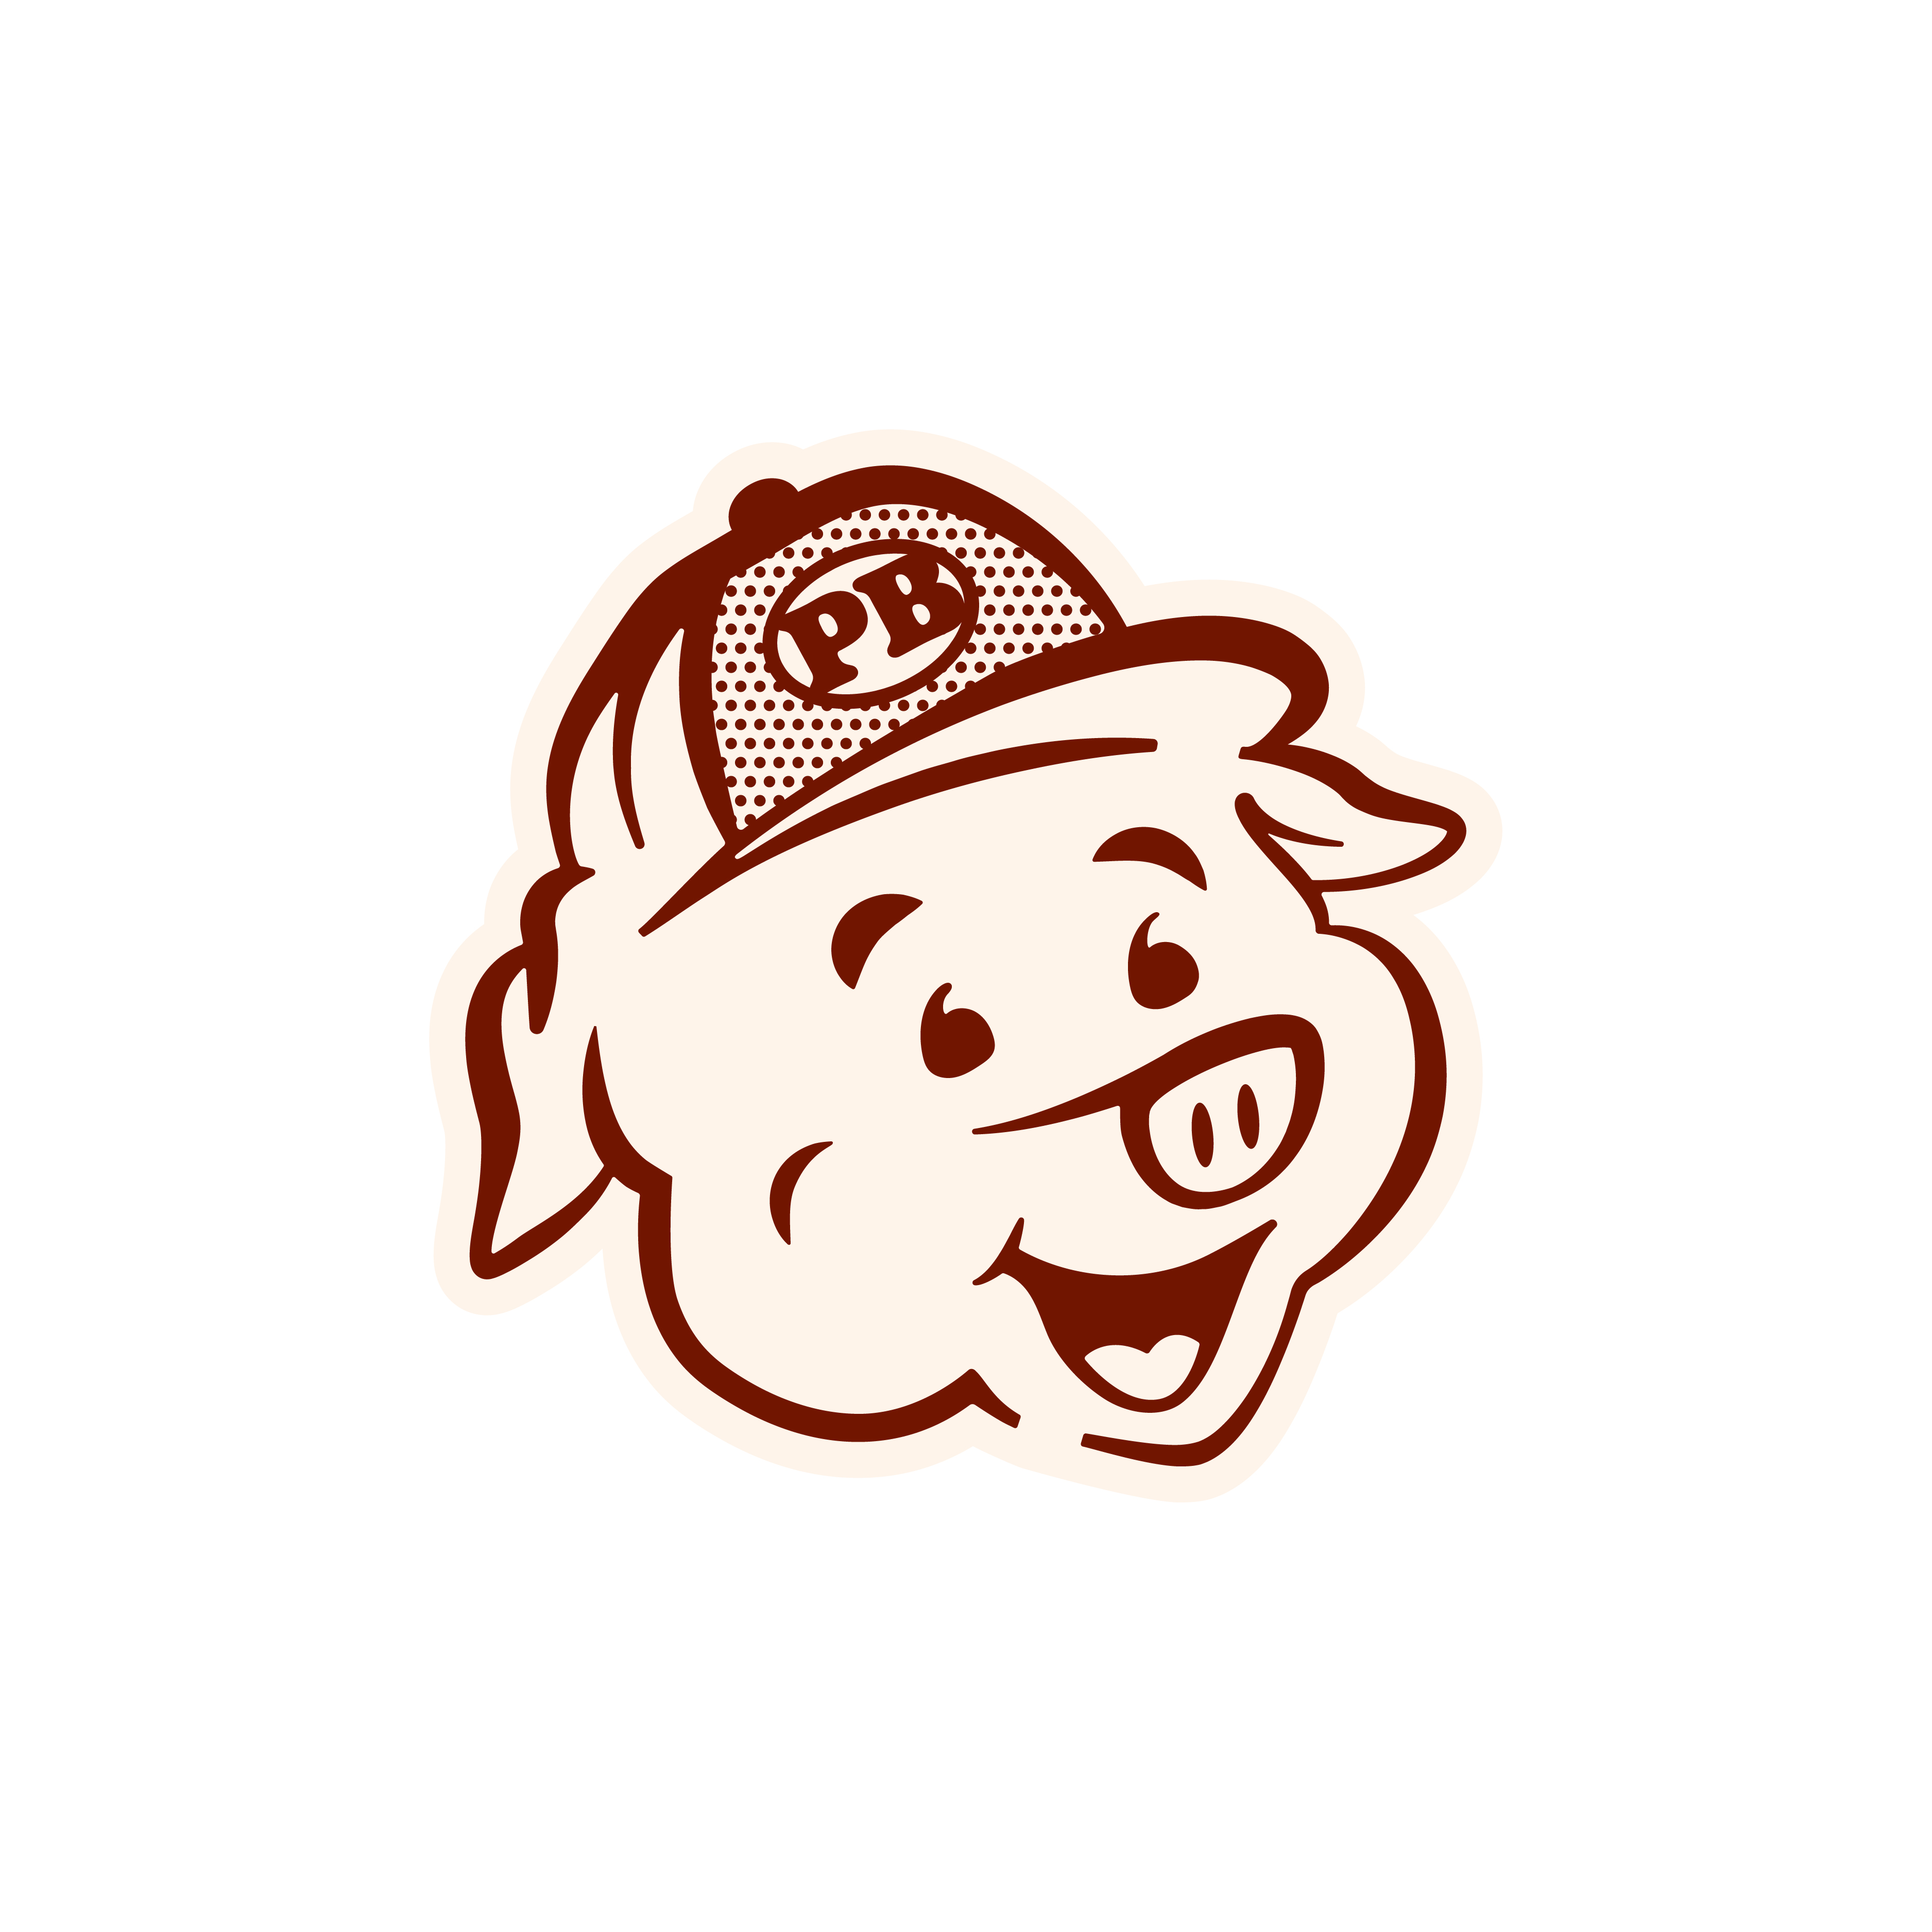 Papa Bucks BBQ Pig Character logo design by logo designer Pioneer Design for your inspiration and for the worlds largest logo competition